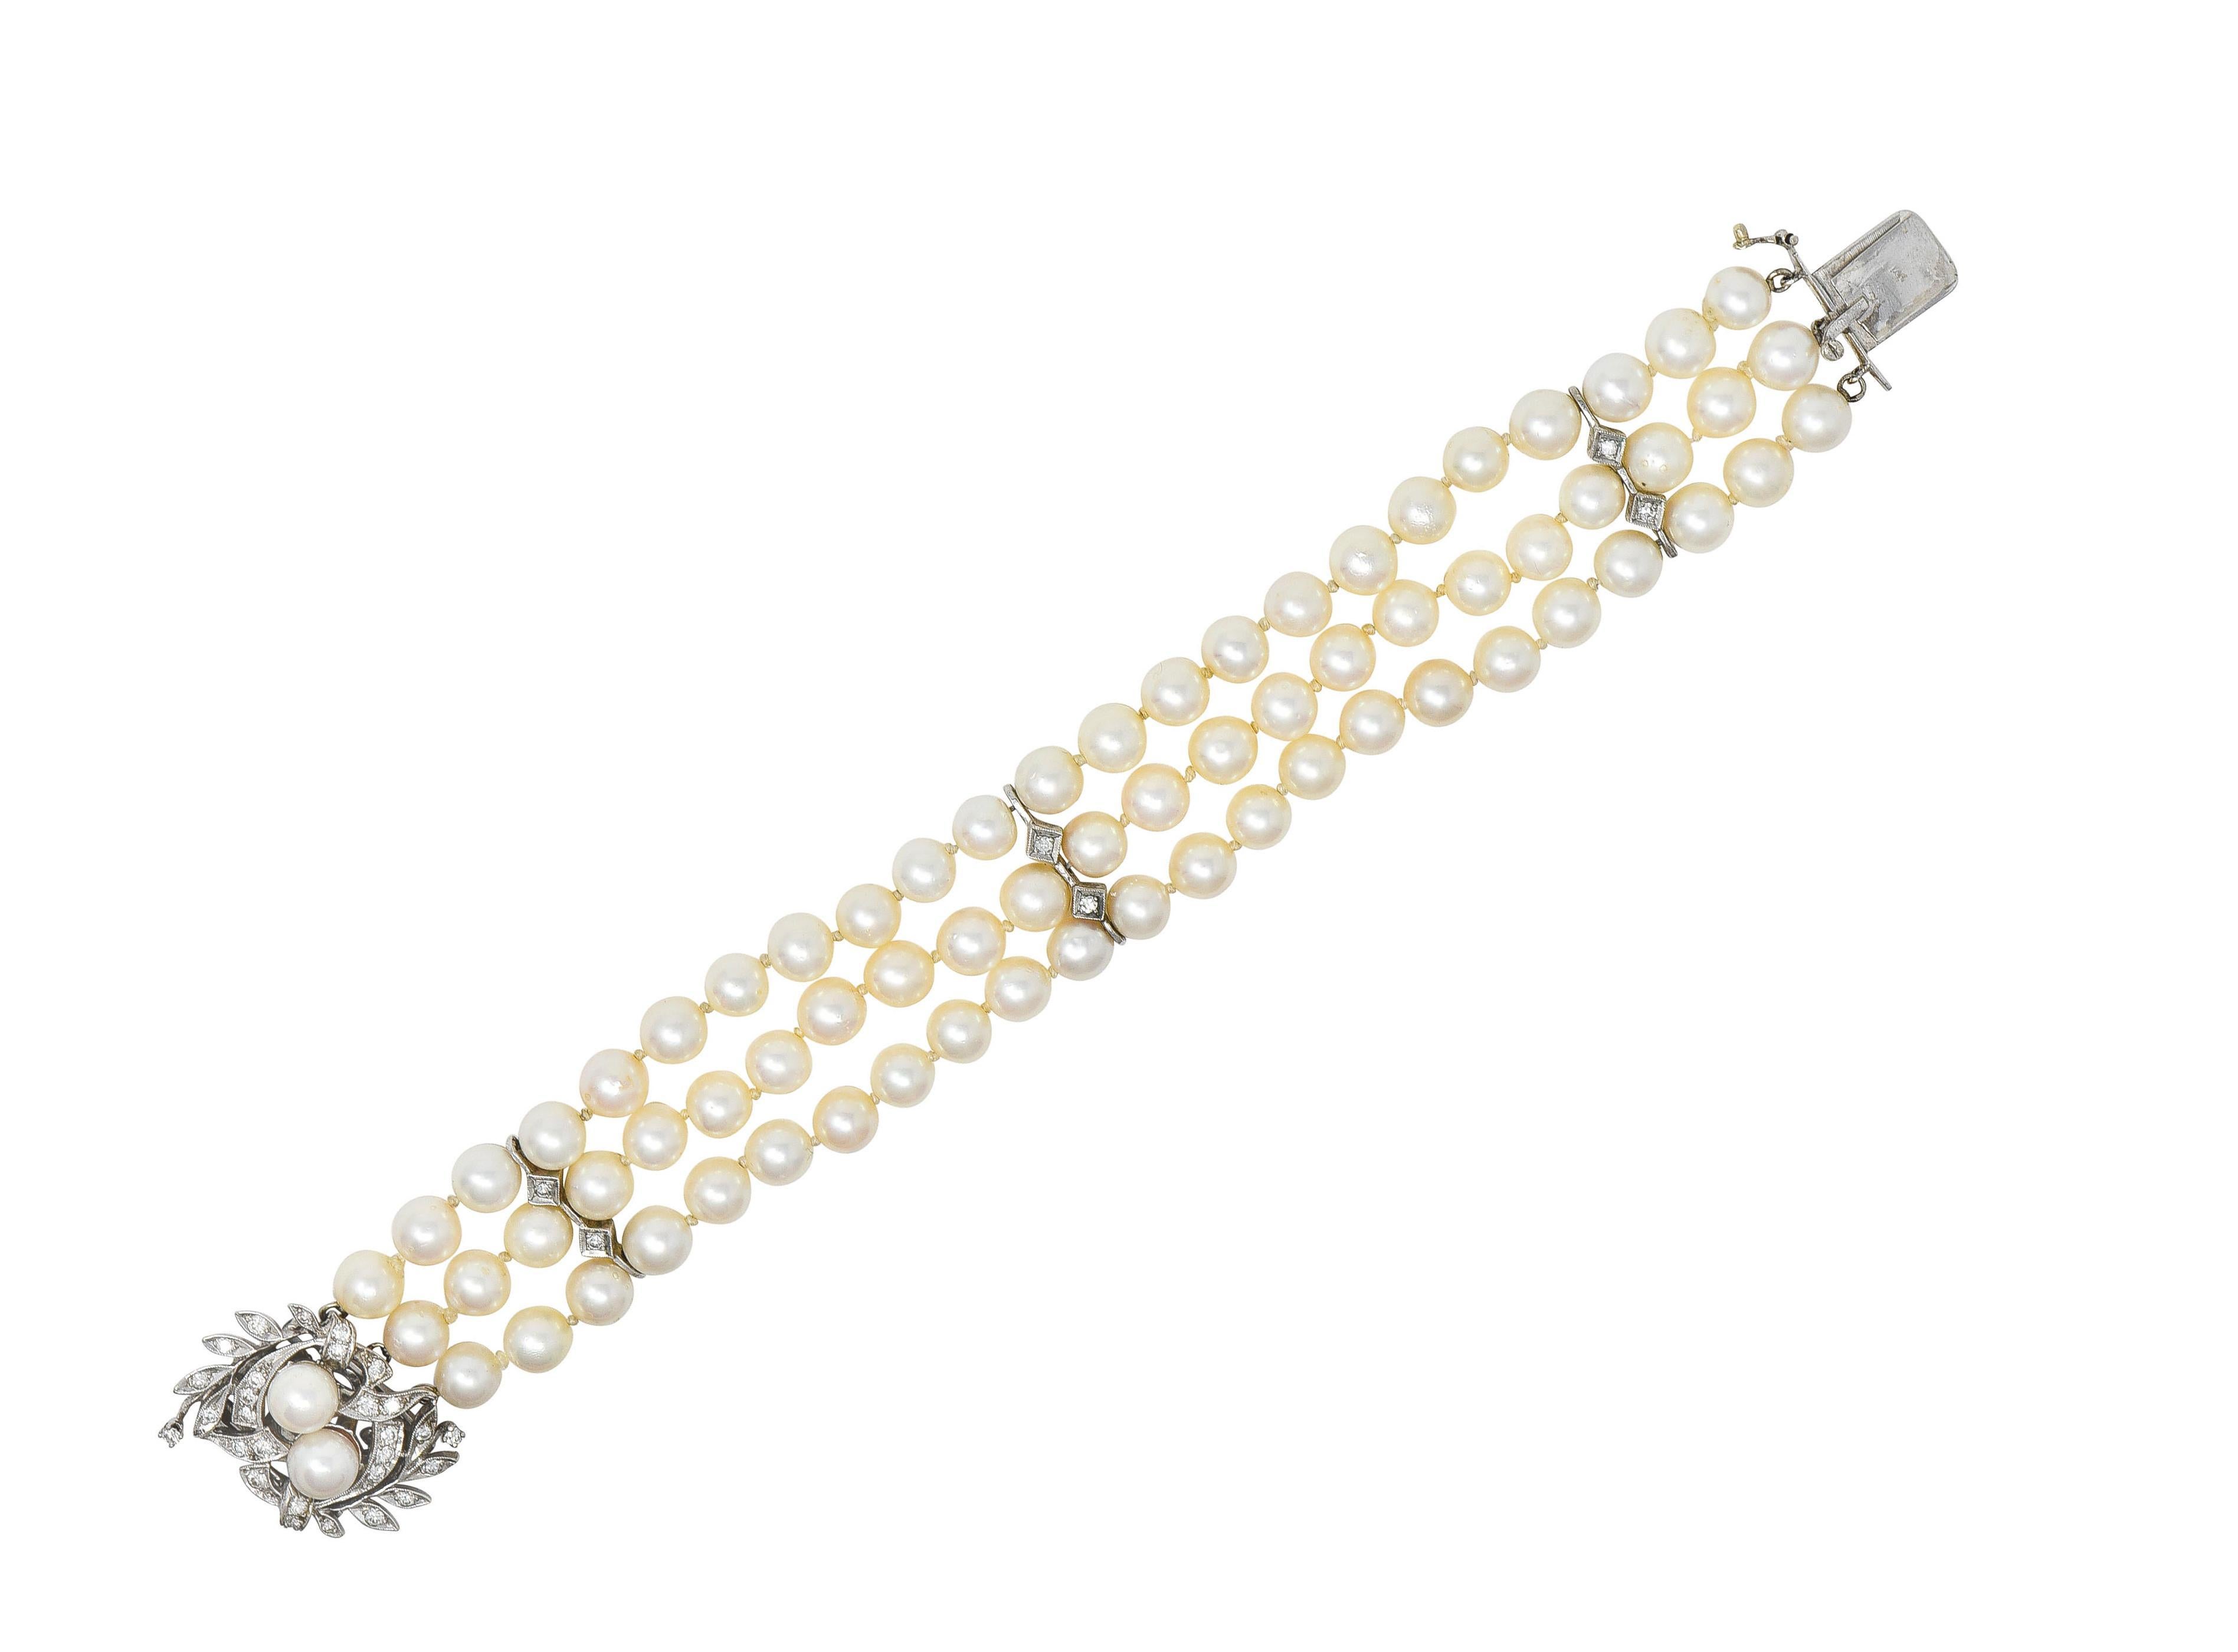 Comprised of three strands of round pearl beads with white gold foliate and diamond motif stations 
Pearls range in size from 6.0 to 7.0 mm - cream to pink in color with strong iridescence and luster
Foliate motif station doubles as clasp and